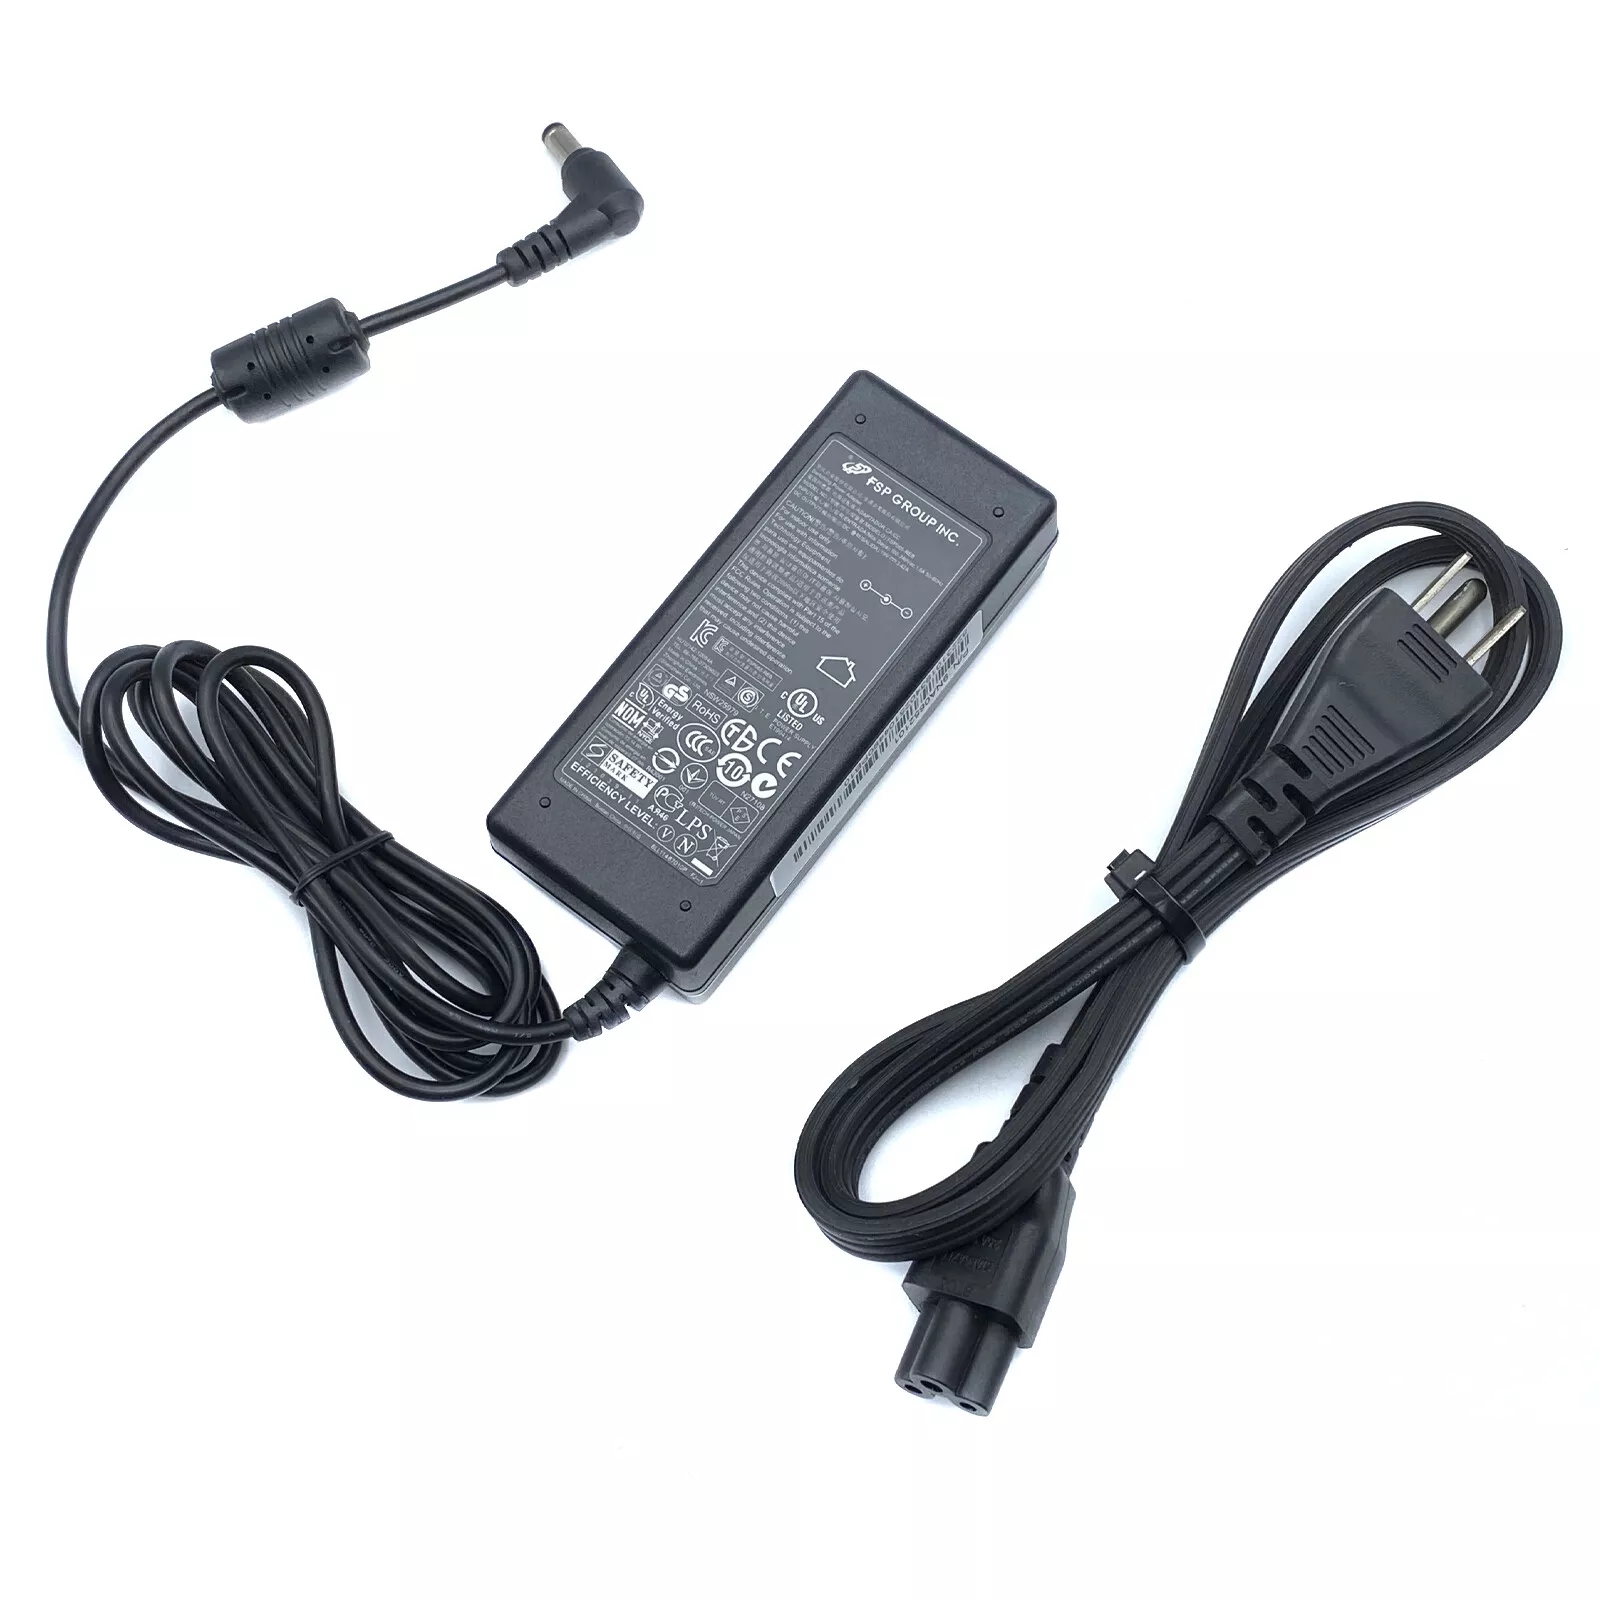 *Brand NEW*Genuine FSP 19V 3.42A AC Adapter for Laptop Asus VivoBook Pro 17 N705UN N705UD Power Supply